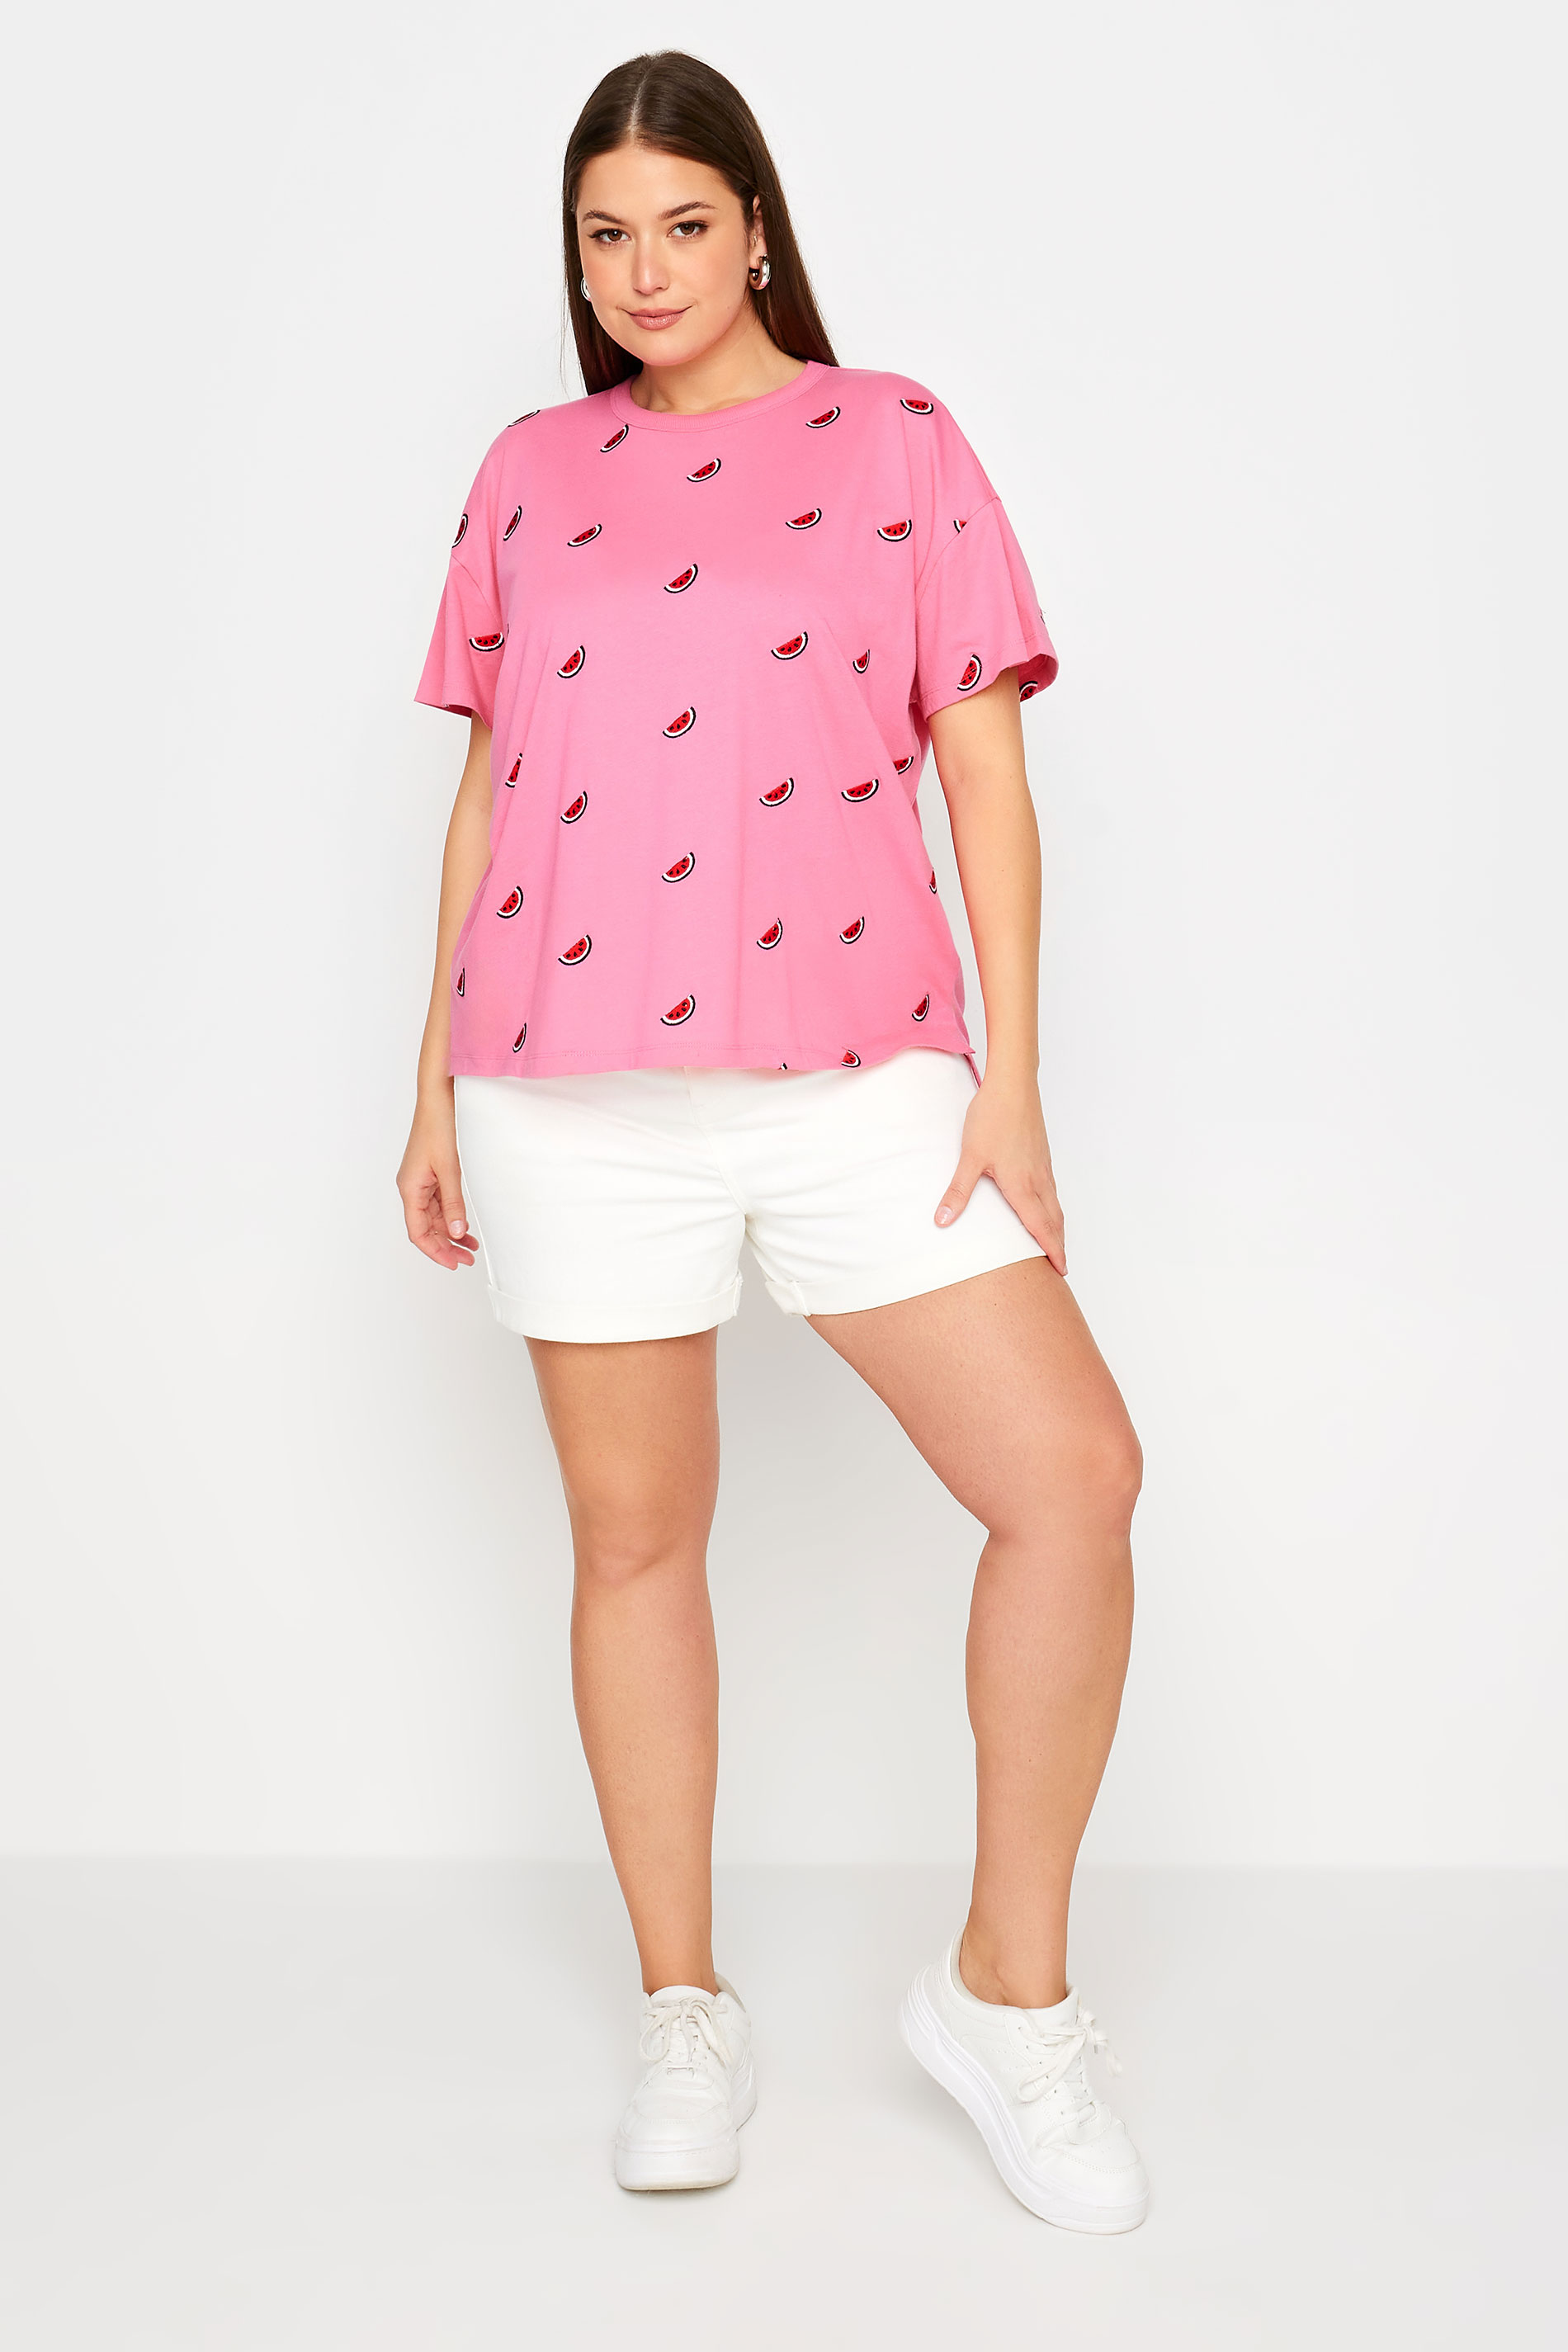 LIMITED COLLECTION Plus Size Pink Embroidered Watermelon T-Shirt | Yours Clothing 2